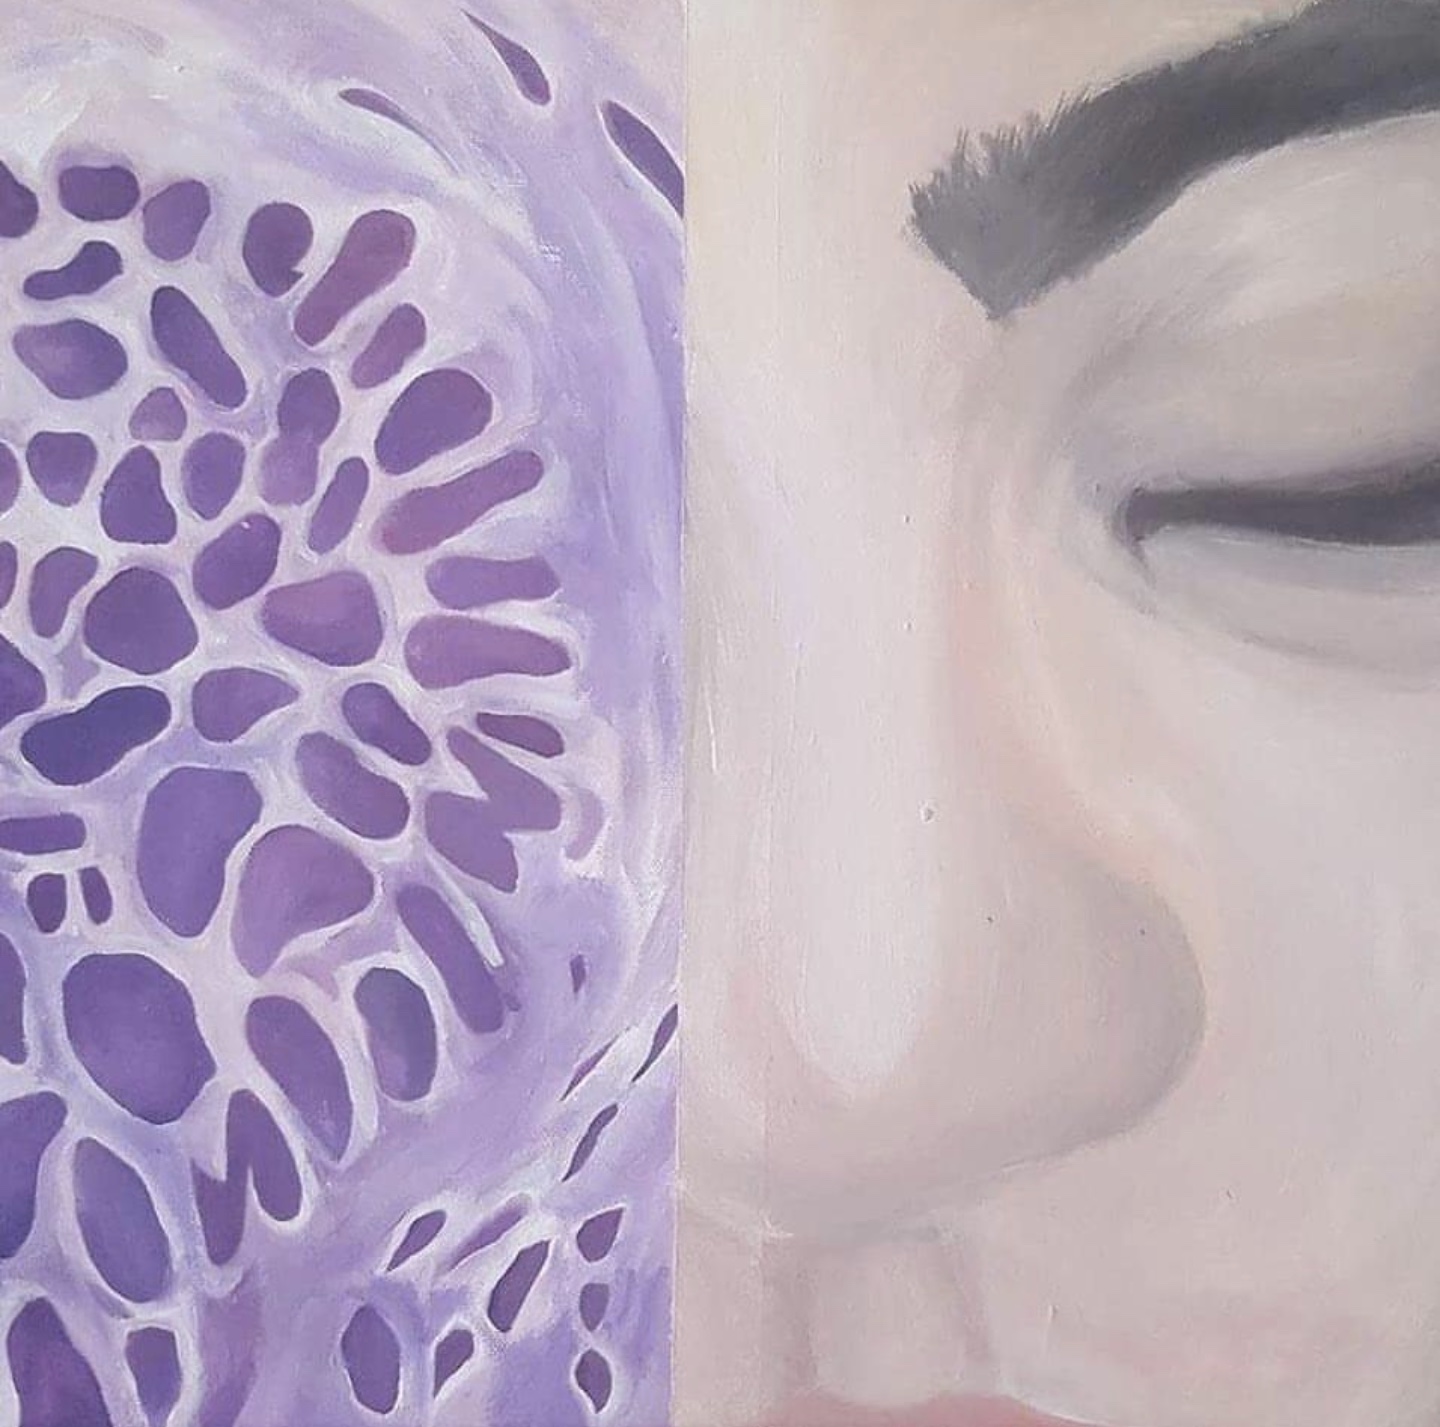 Skin Acrylic Painting. (Left) Skin Cell, (right) self-portrait.